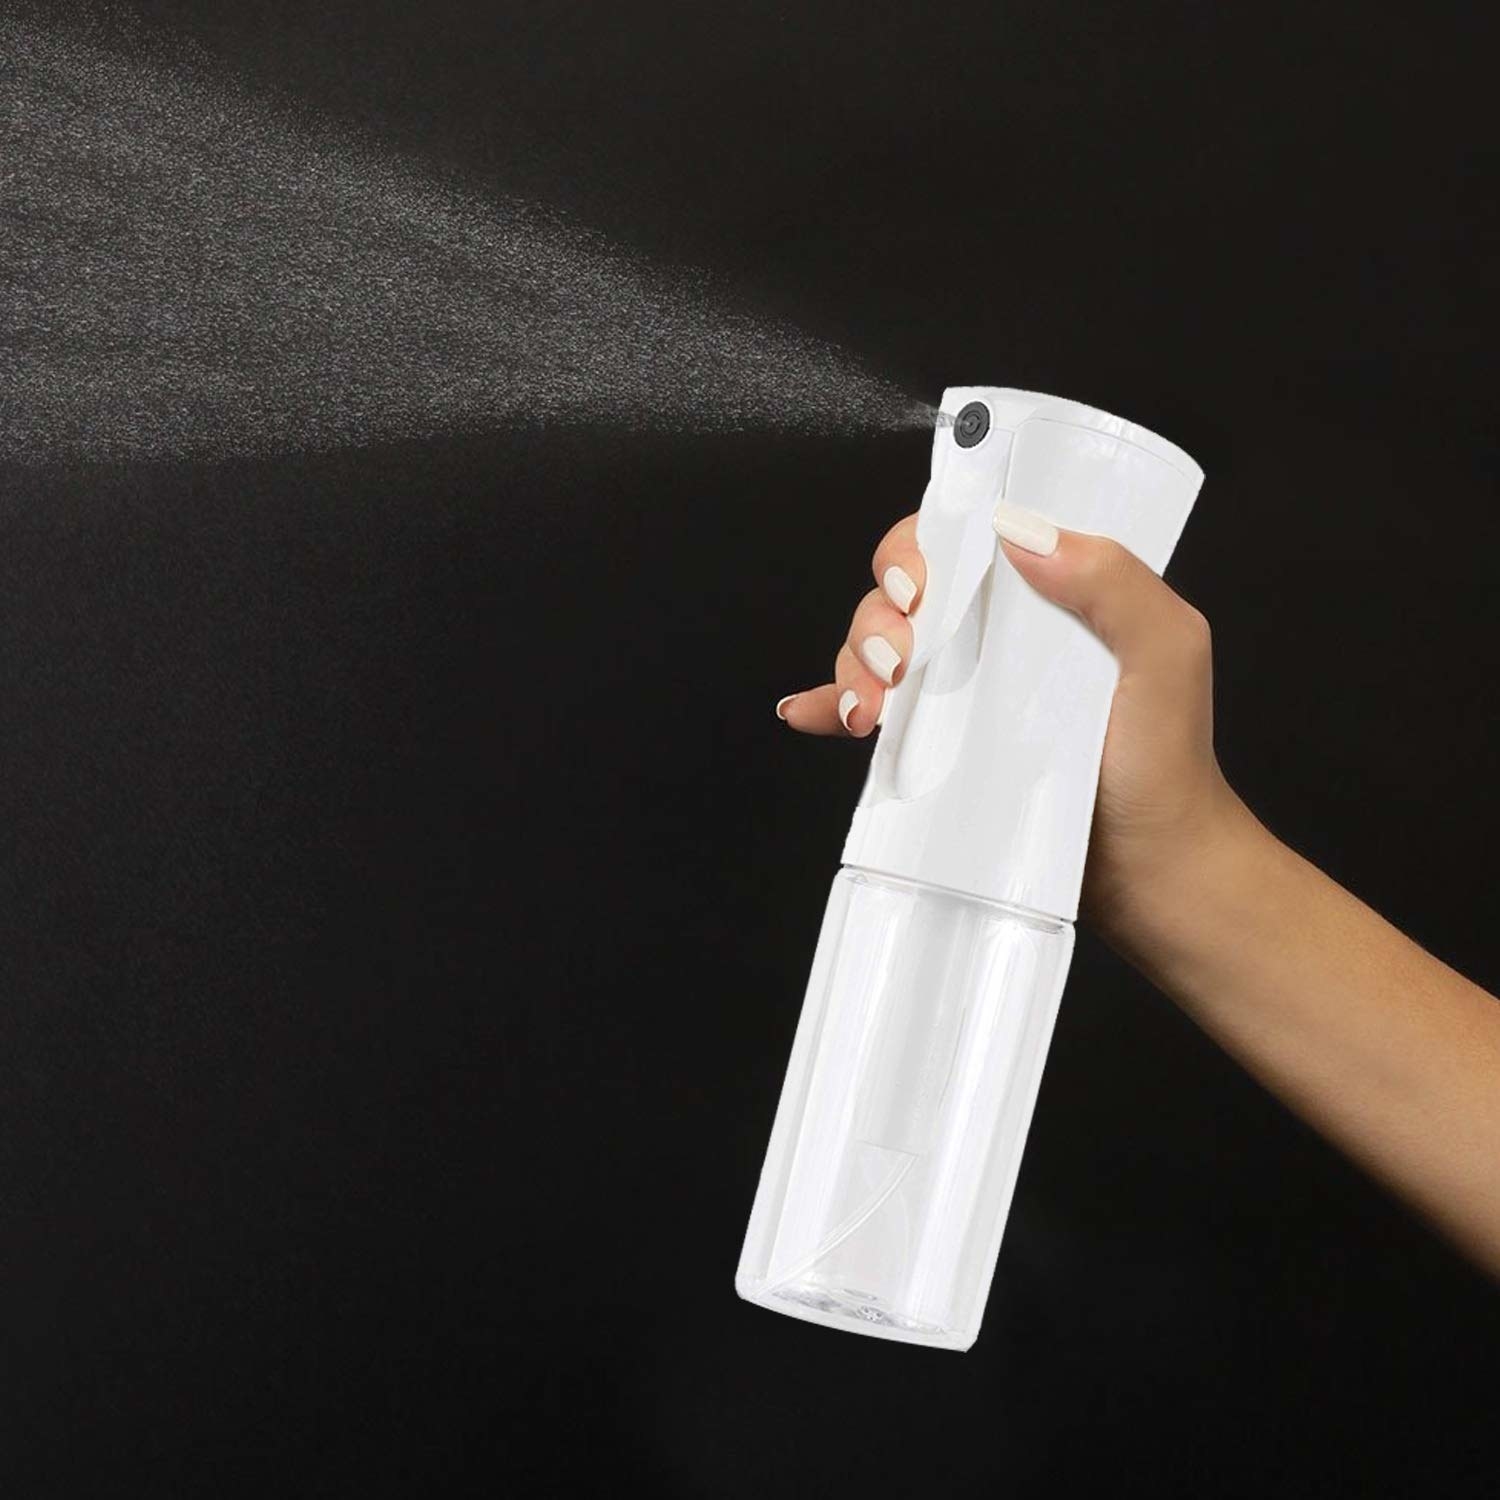 model holding the spray bottle and spraying it